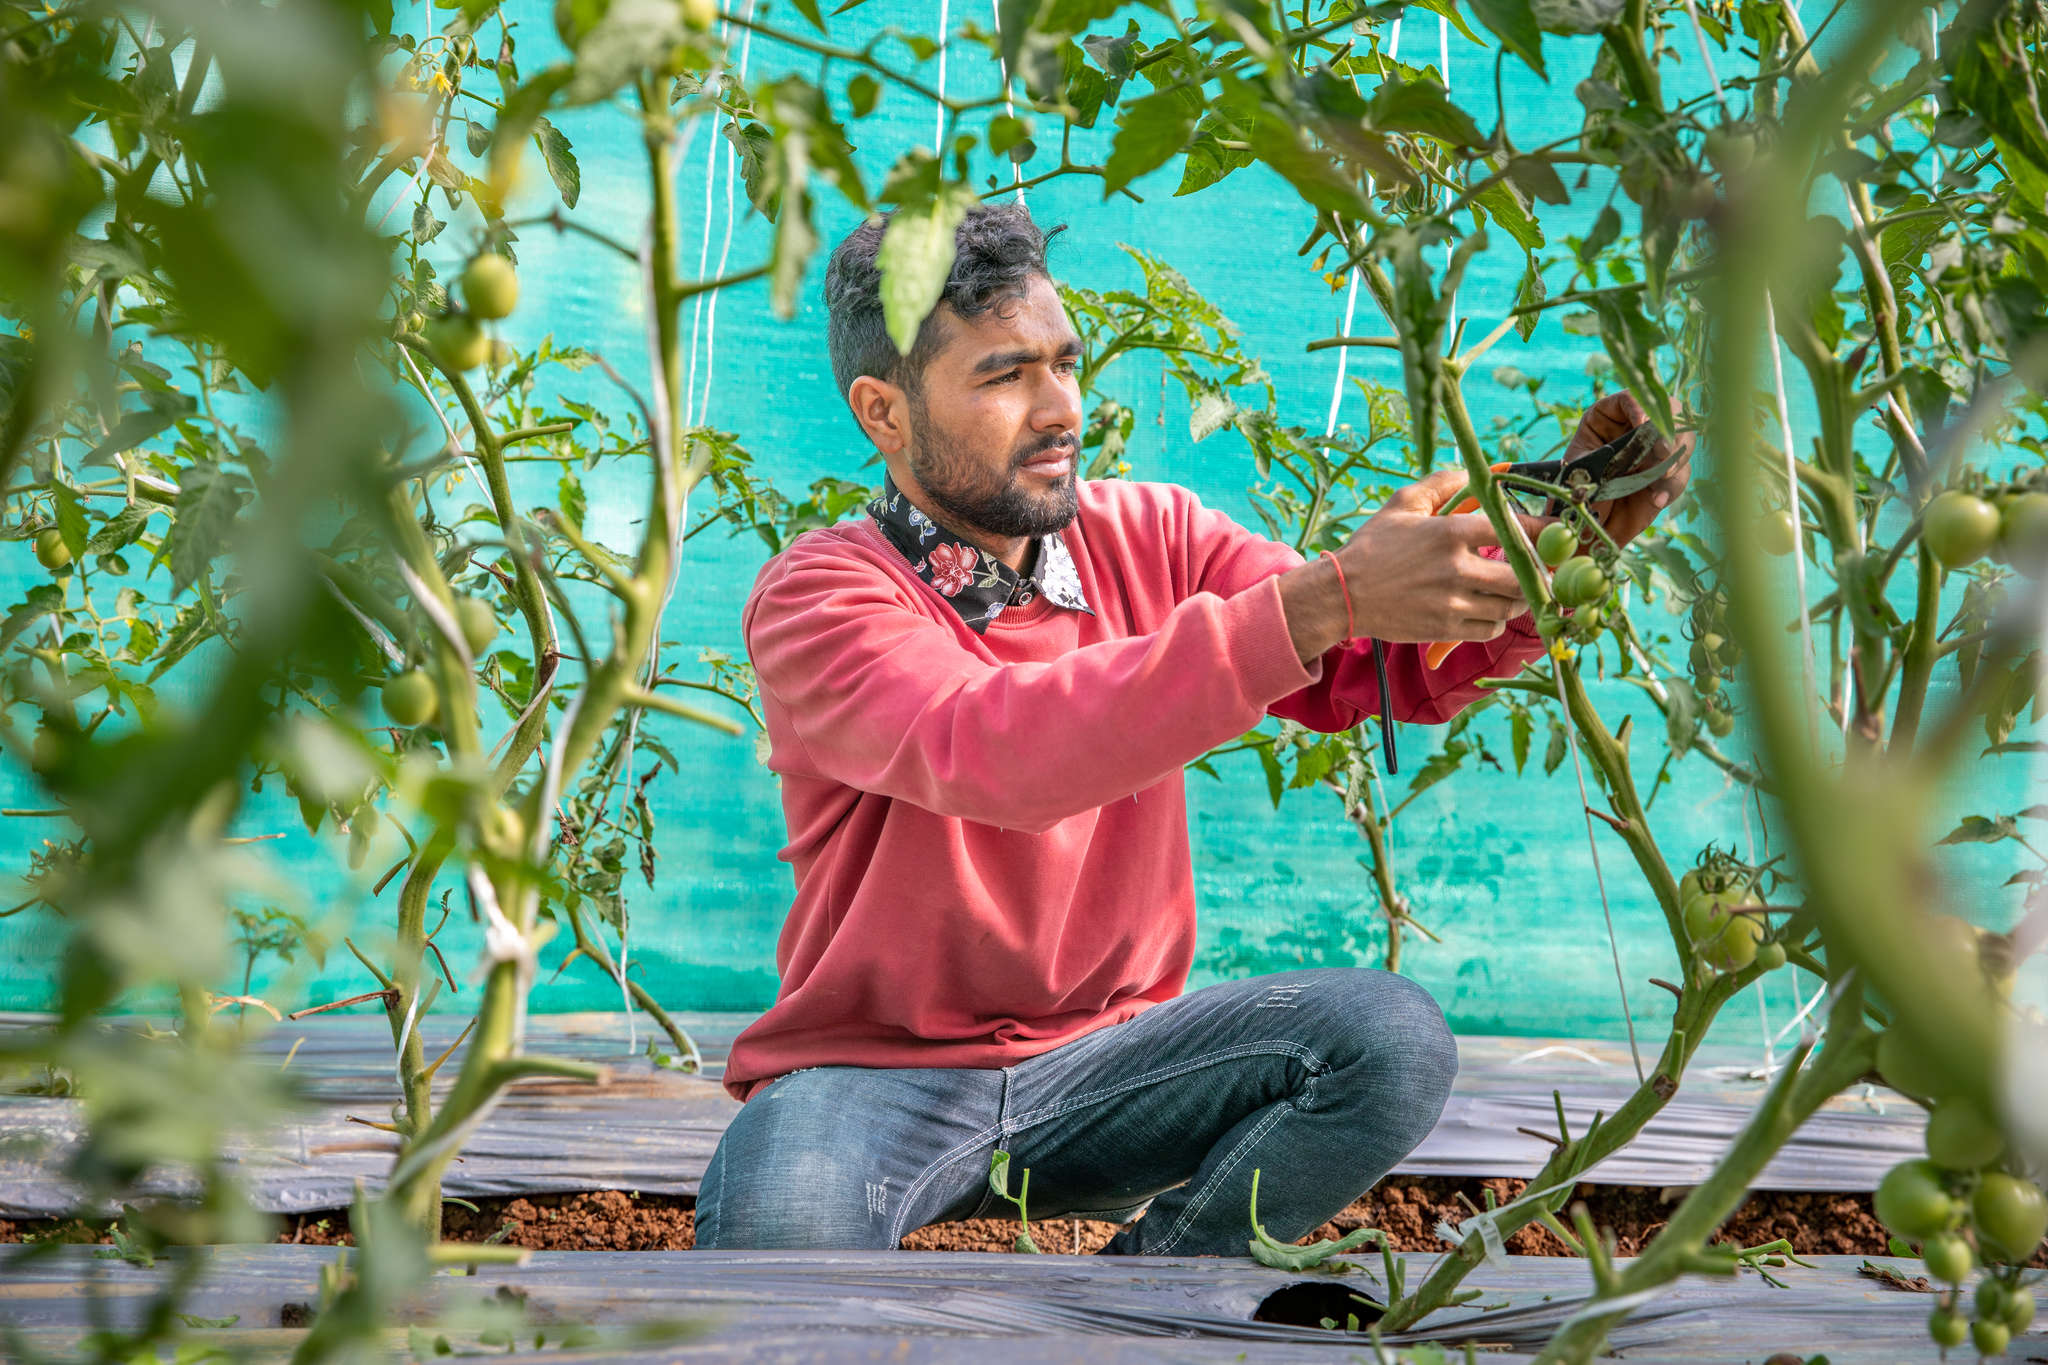 A person pruning tomato plants at a training center.